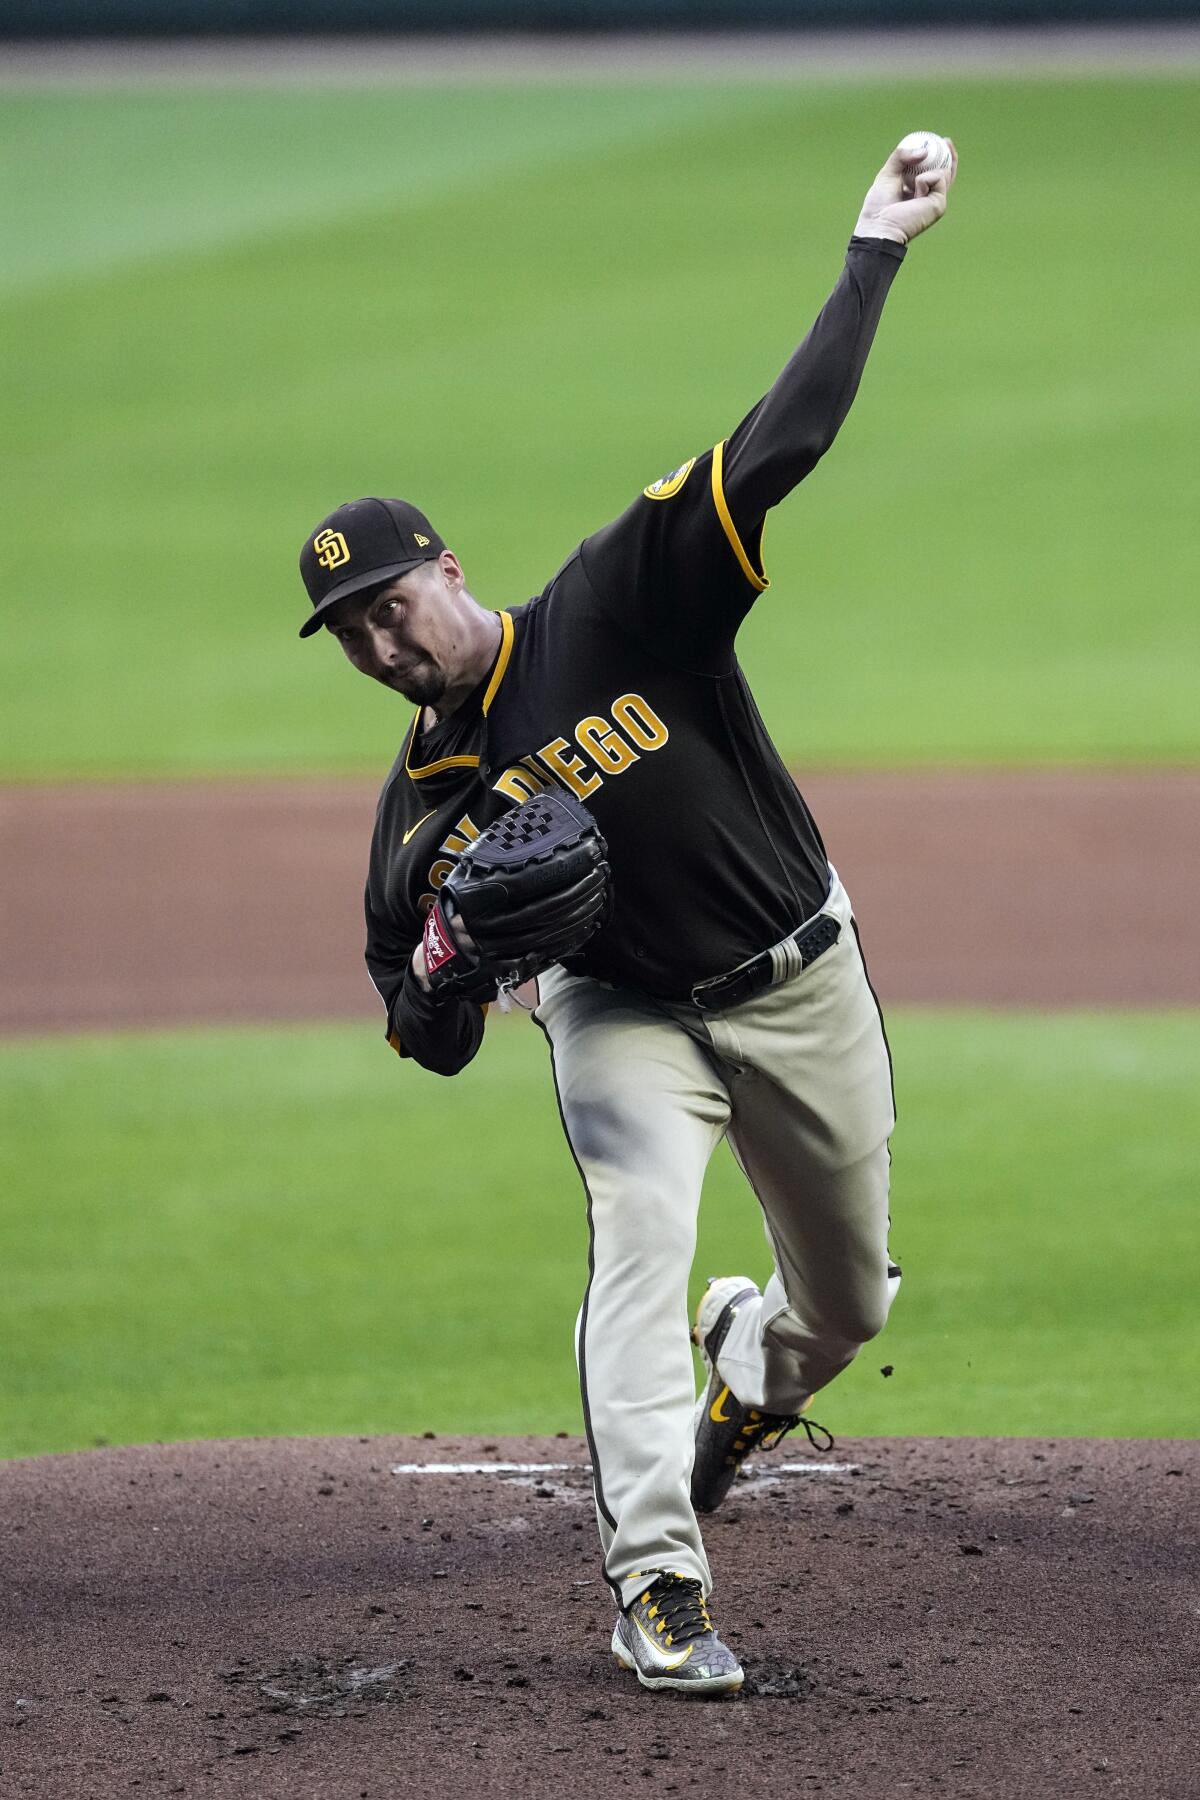 For Pirates pitchers from San Diego, the connections run deep